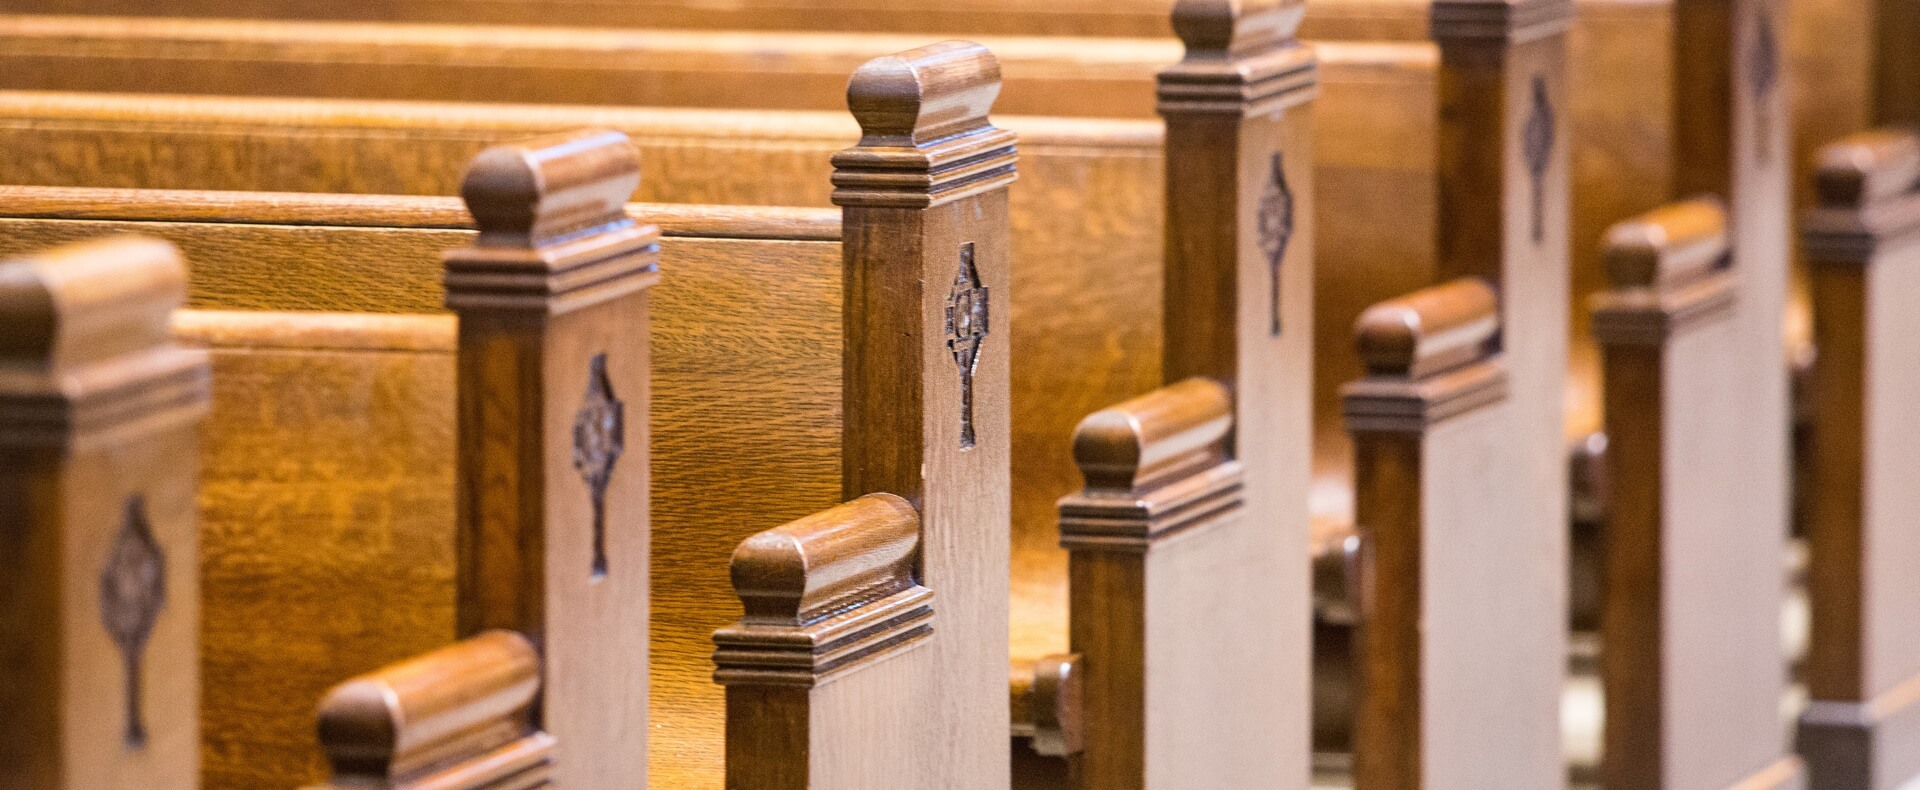 These church pews are waiting for your church family - Real Estate Professional Services - The Church Specialists